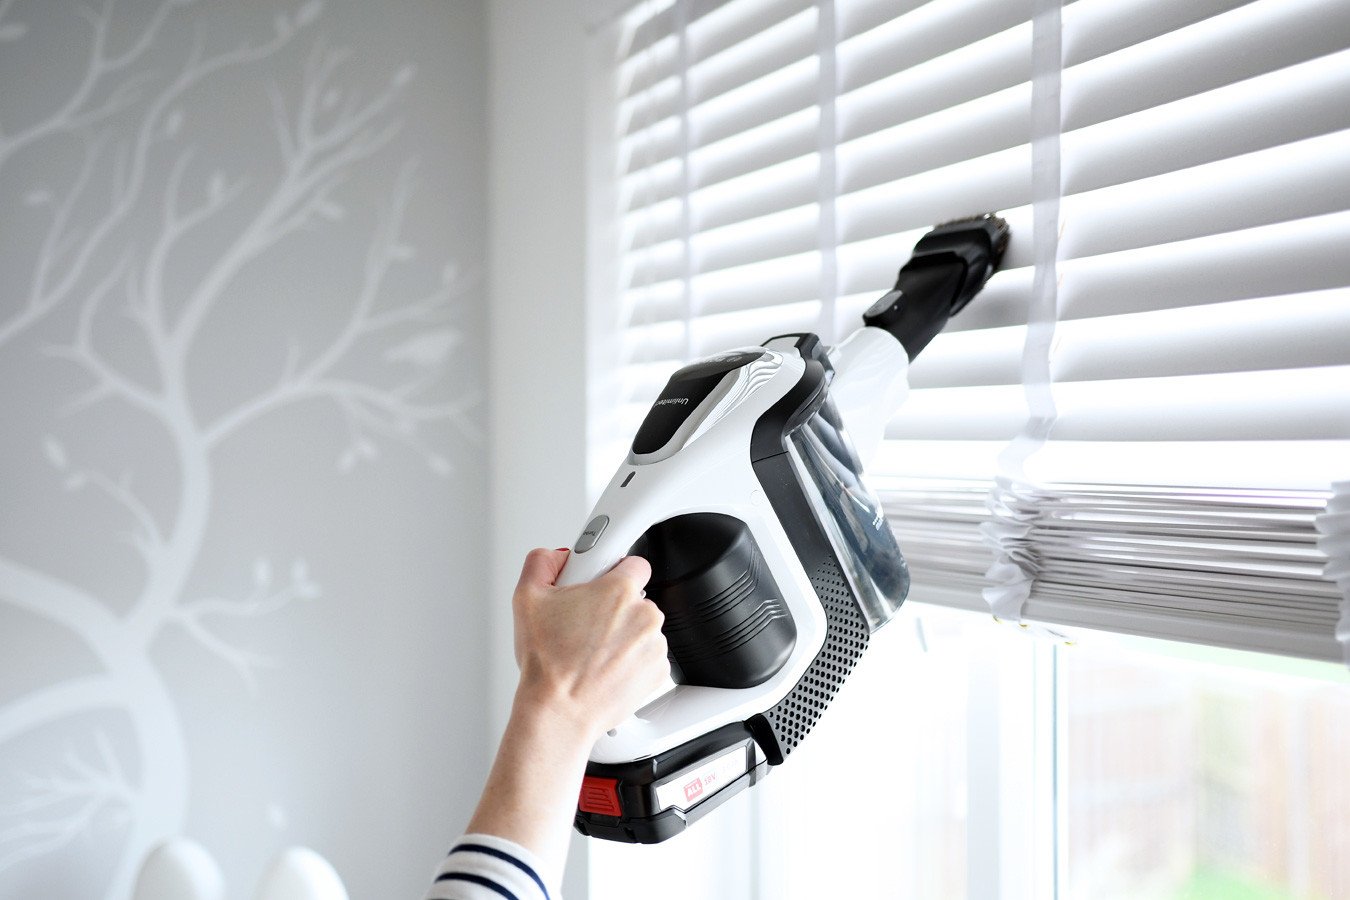 cleaning the blinds with the Bosch Unlimited vacuum cleaner